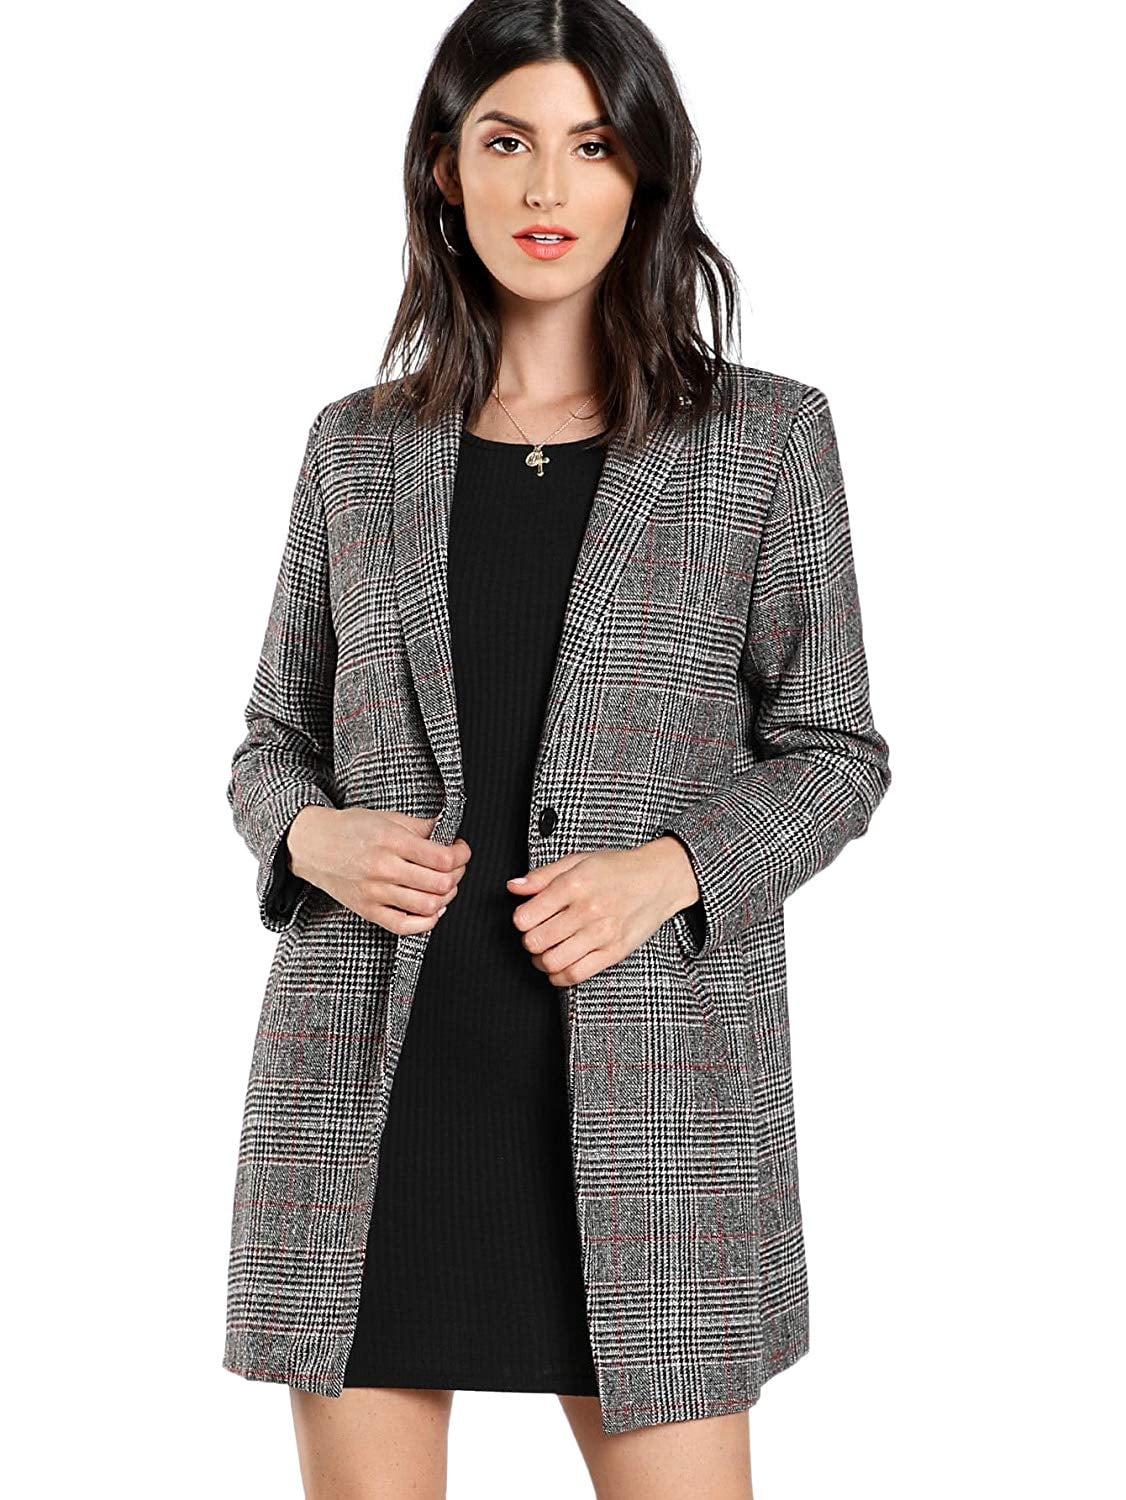 SheIn Lapel Collar Coat Long Sleeve Plaid Blazer | 10 Plaid Blazers You'll Never Guess We Uncovered on Amazon — They're Too Good | POPSUGAR Photo 2